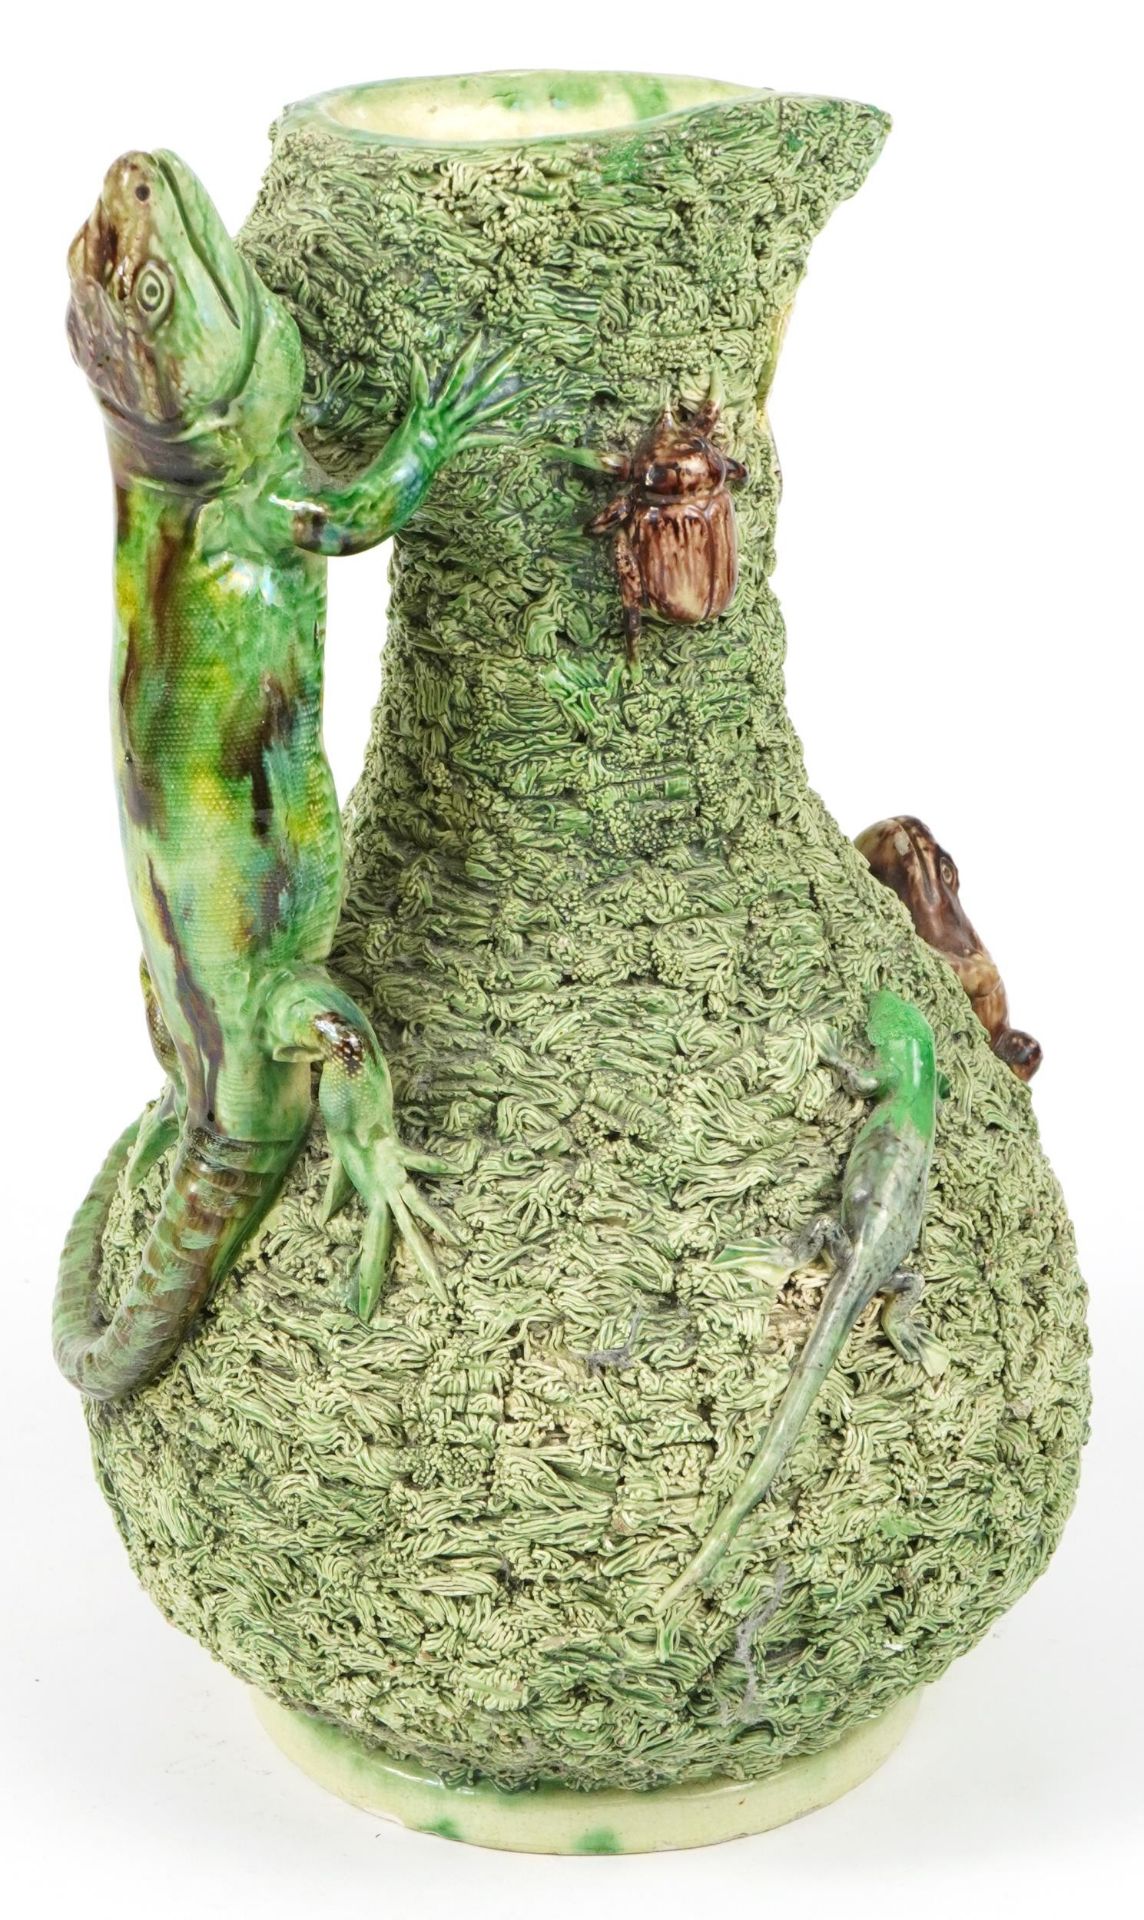 Manuel Mafra, 19th century Portuguese Palissy ware Maiolica ewer on stand with lizard handle - Image 4 of 7